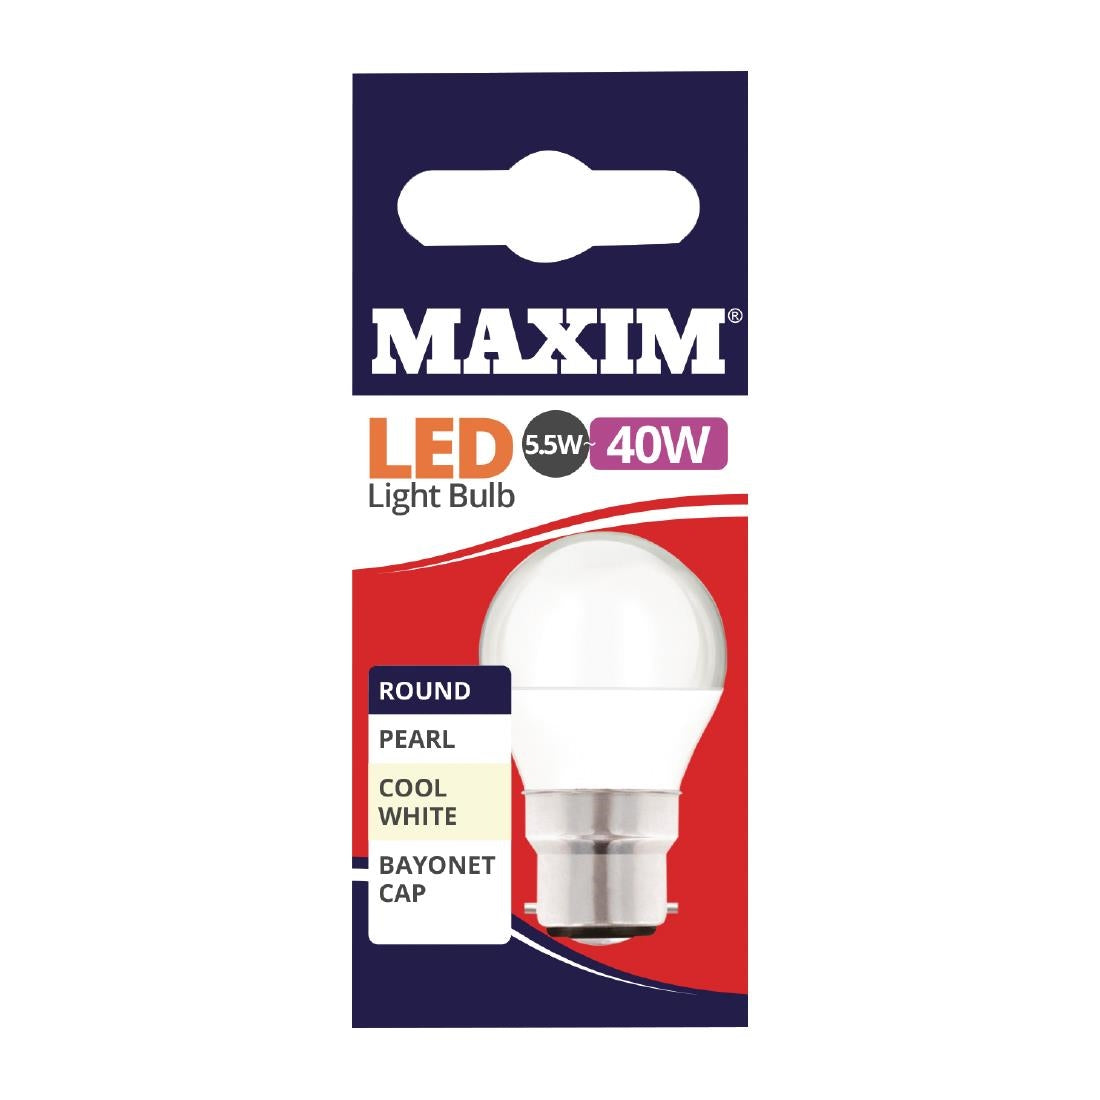 FW514 Maxim LED Round BC Cool White Light Bulb 6/40w JD Catering Equipment Solutions Ltd